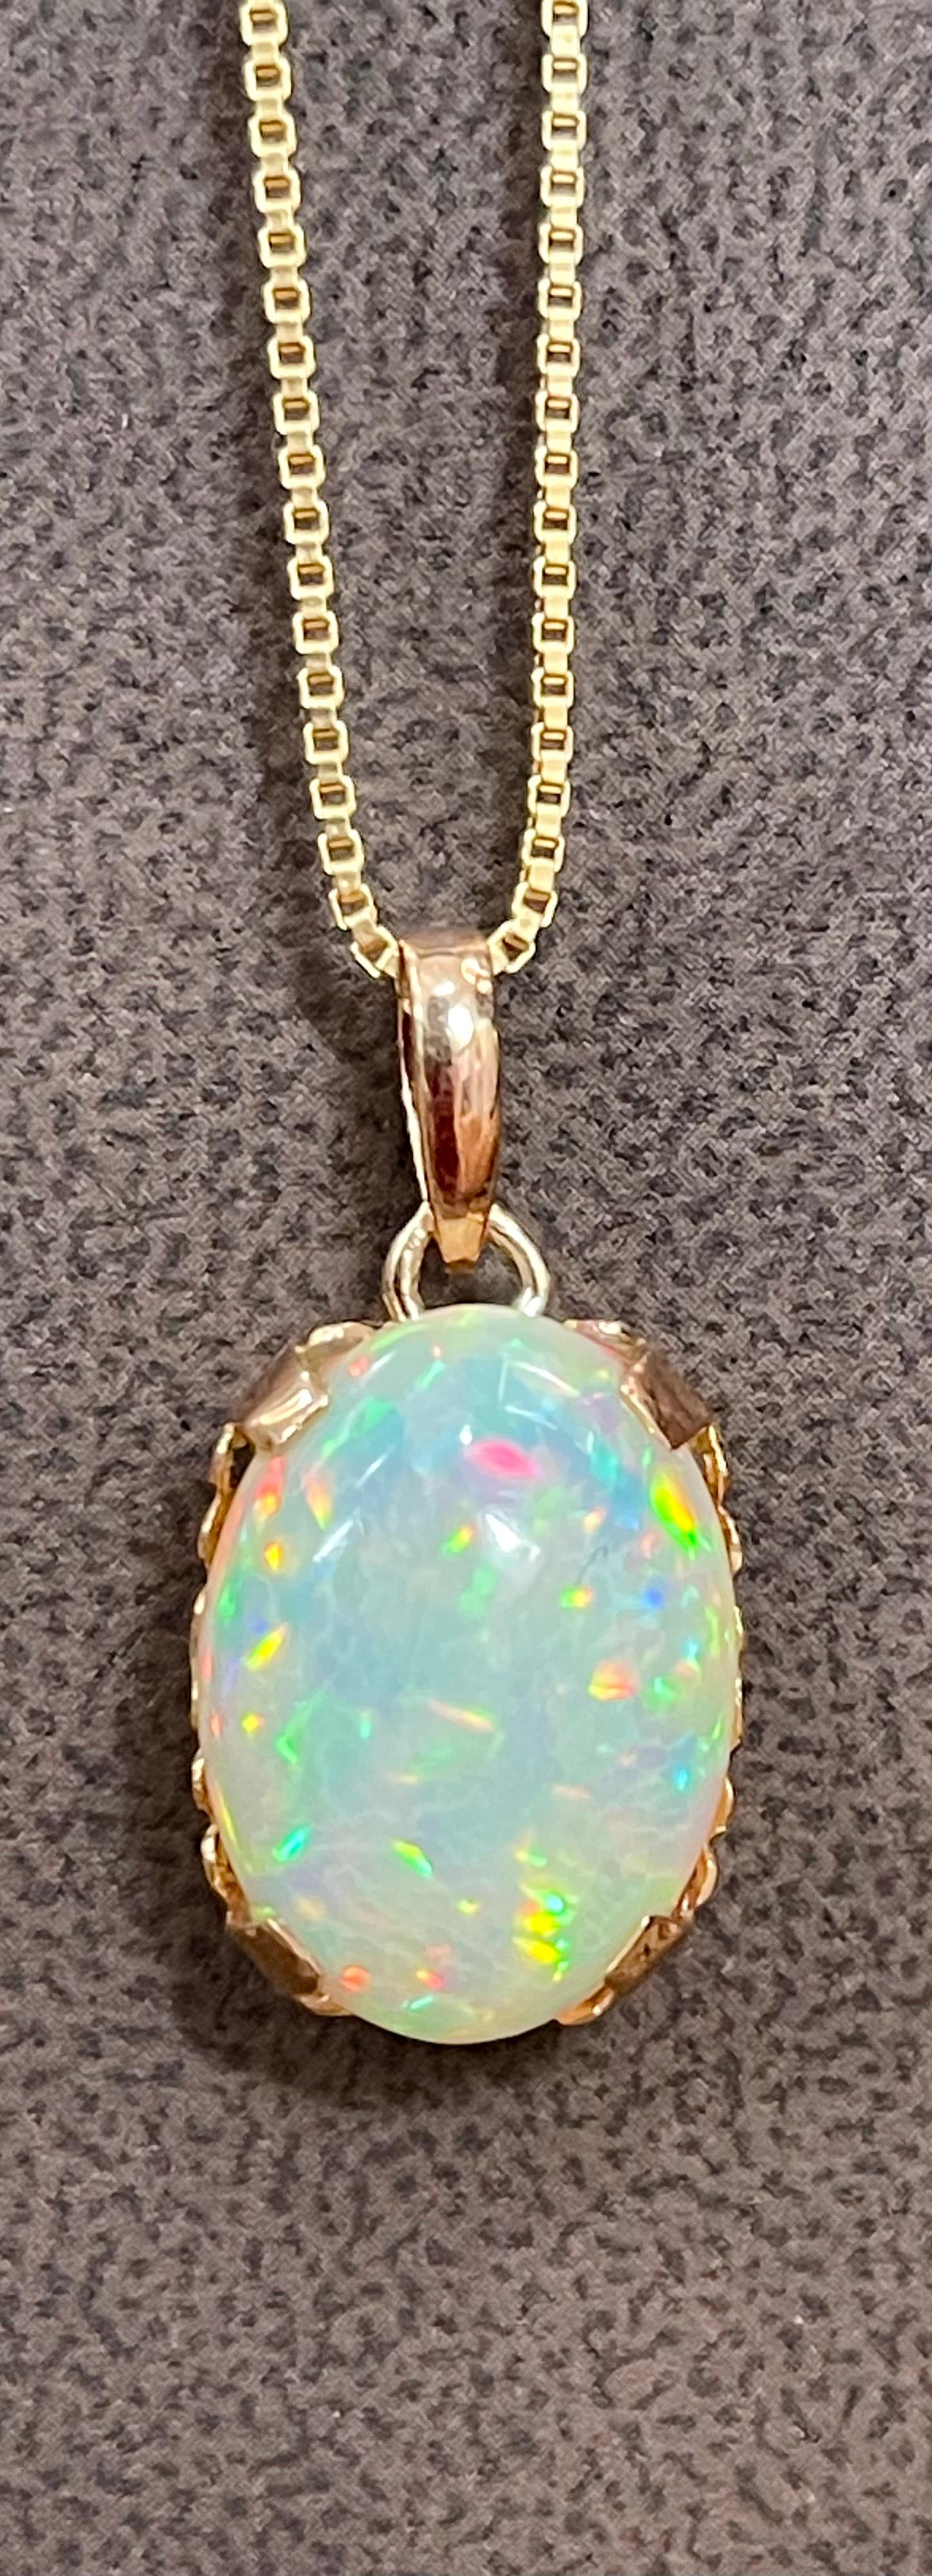 9 Carat Oval Ethiopian Opal Pendant / Necklace 18 Karat + 18 Kt Gold Chain In Excellent Condition In New York, NY